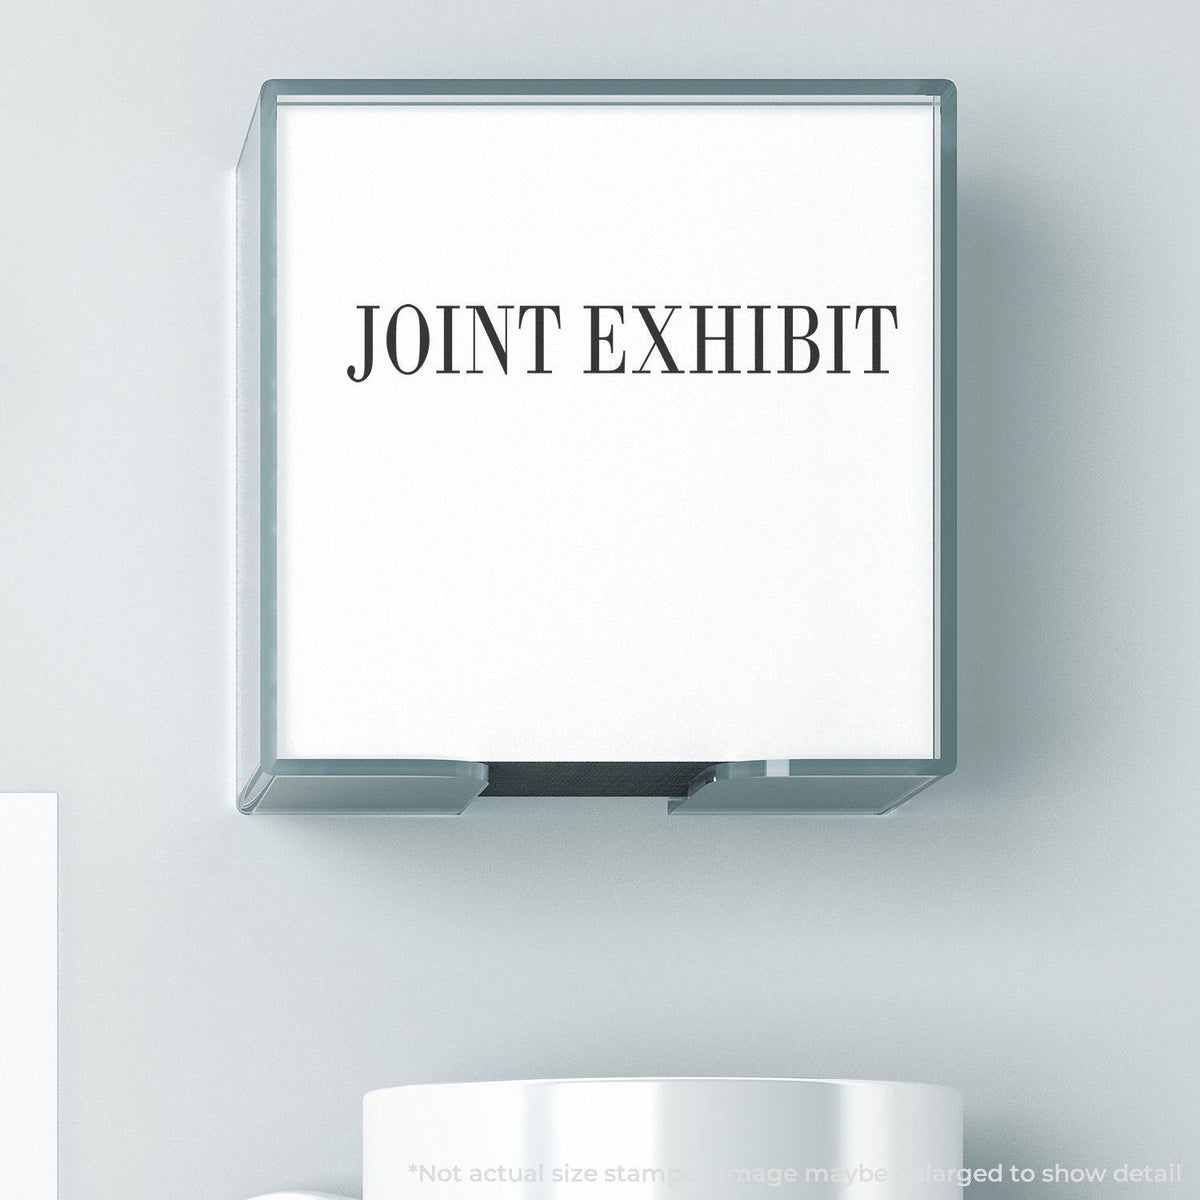 Joint Exhibit Rubber Stamp In Use Photo